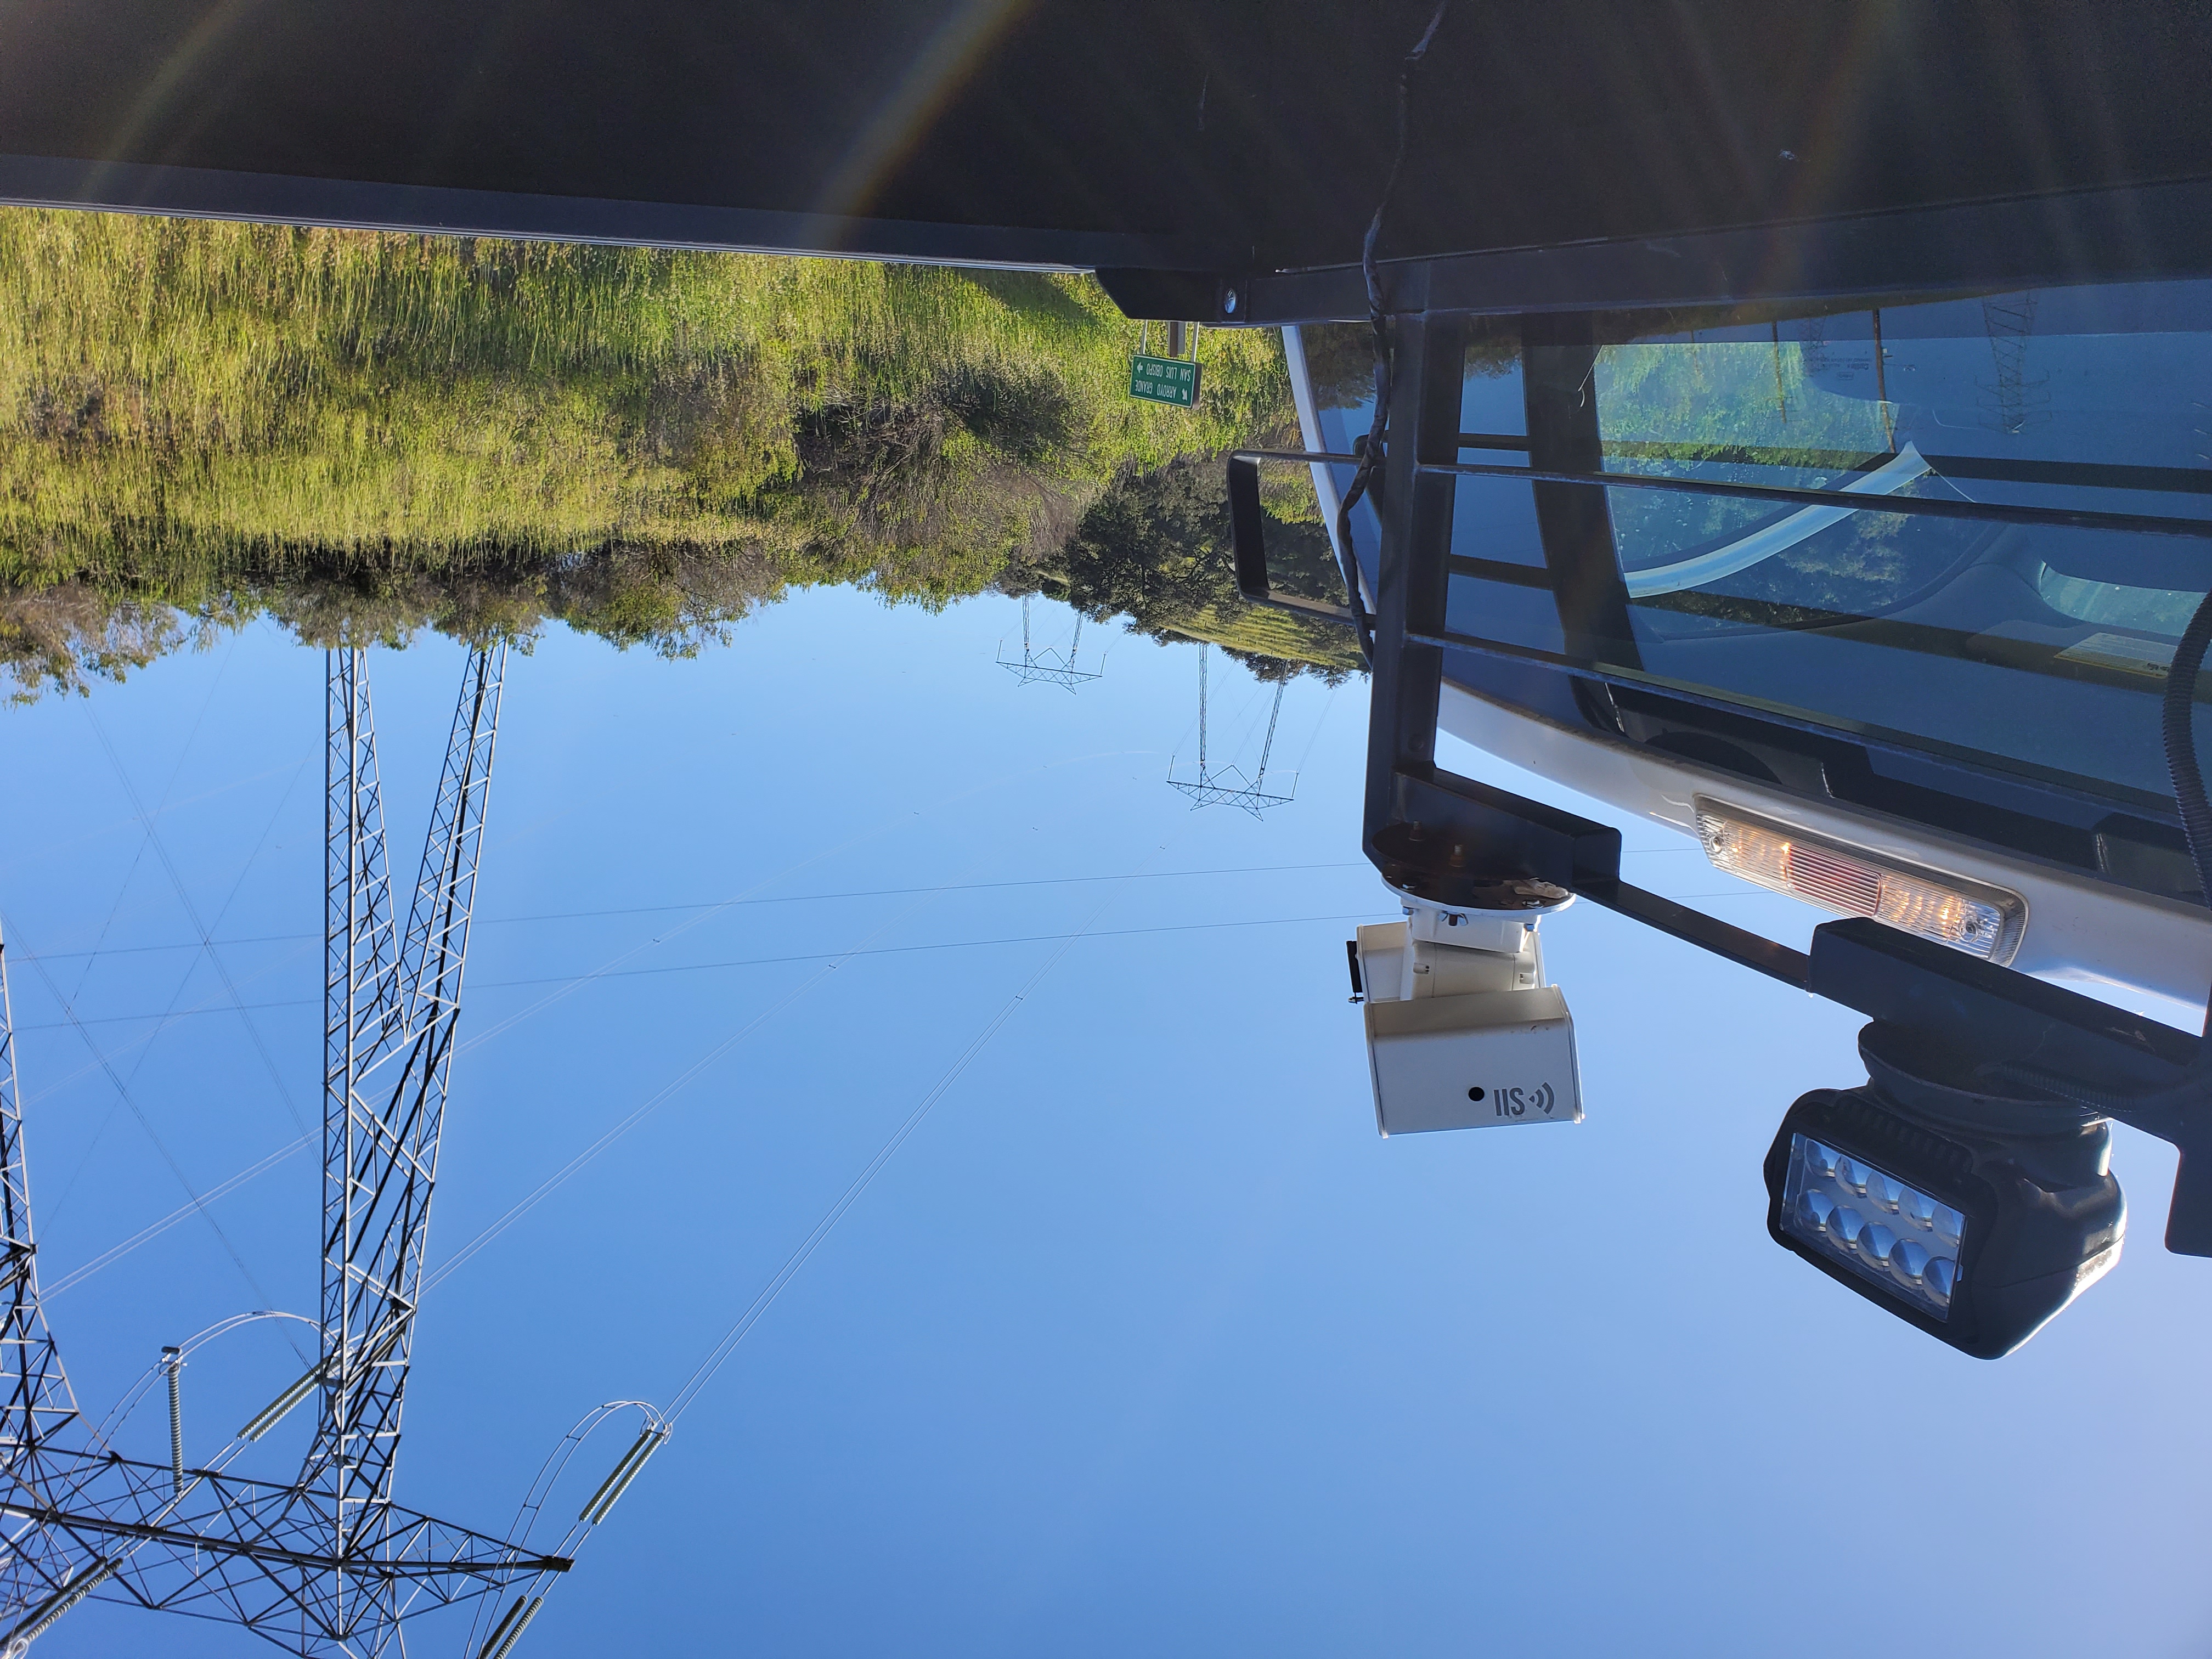 Mini PTZ mounted on an IIS truck, observing transmission lines.